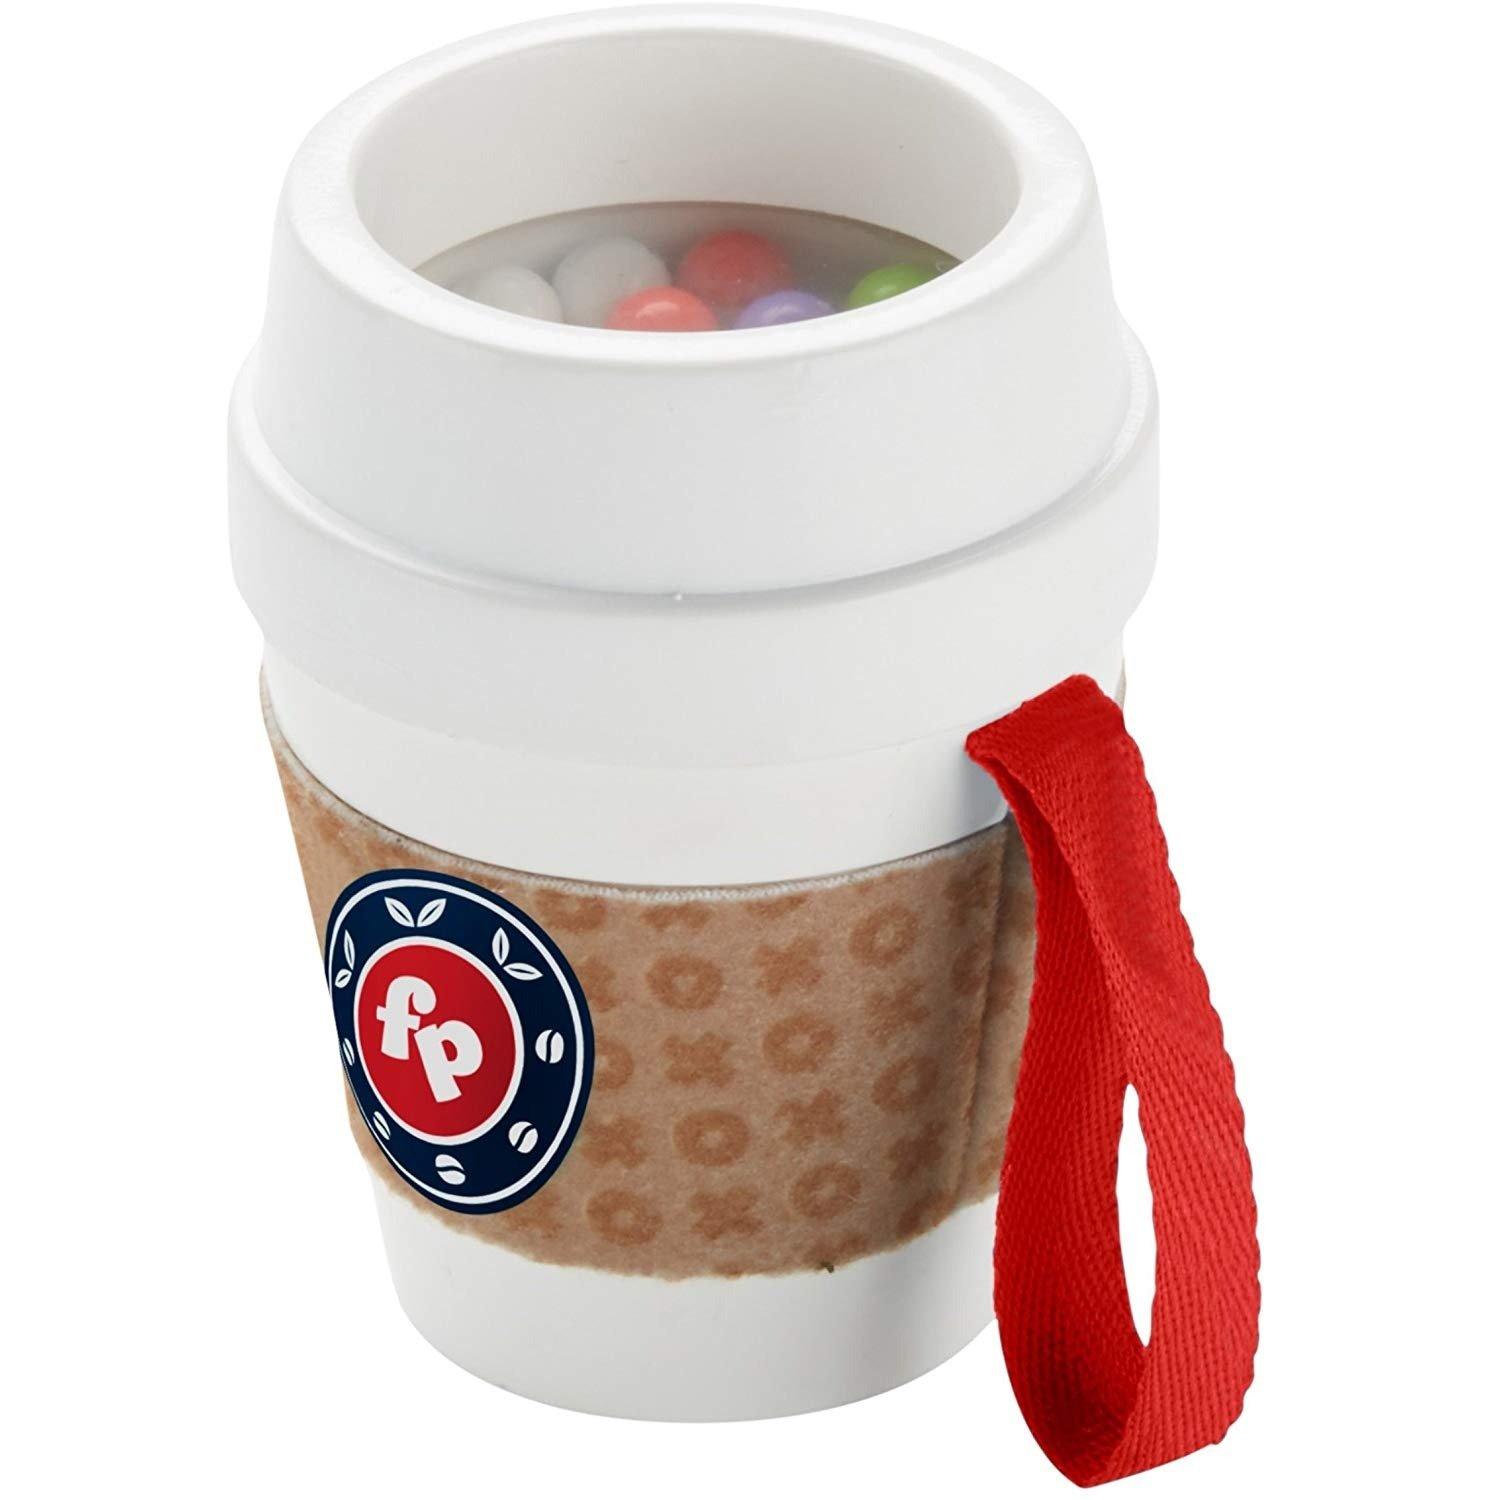 DYW60 Coffee Cup Teether